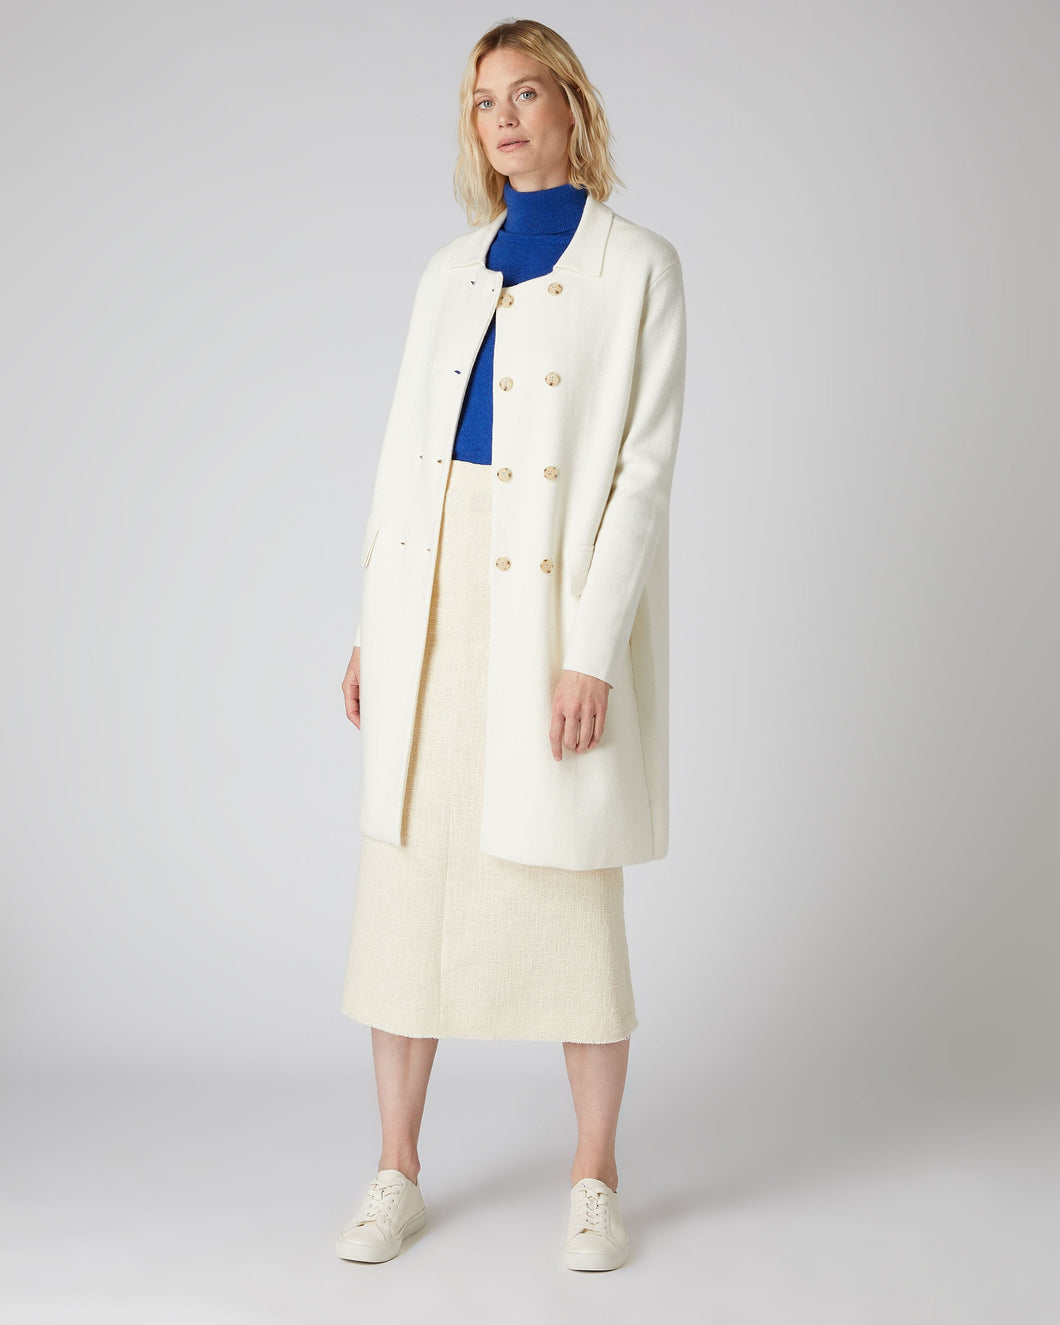 N.Peal Women's Double Breasted Cashmere Coat New Ivory White